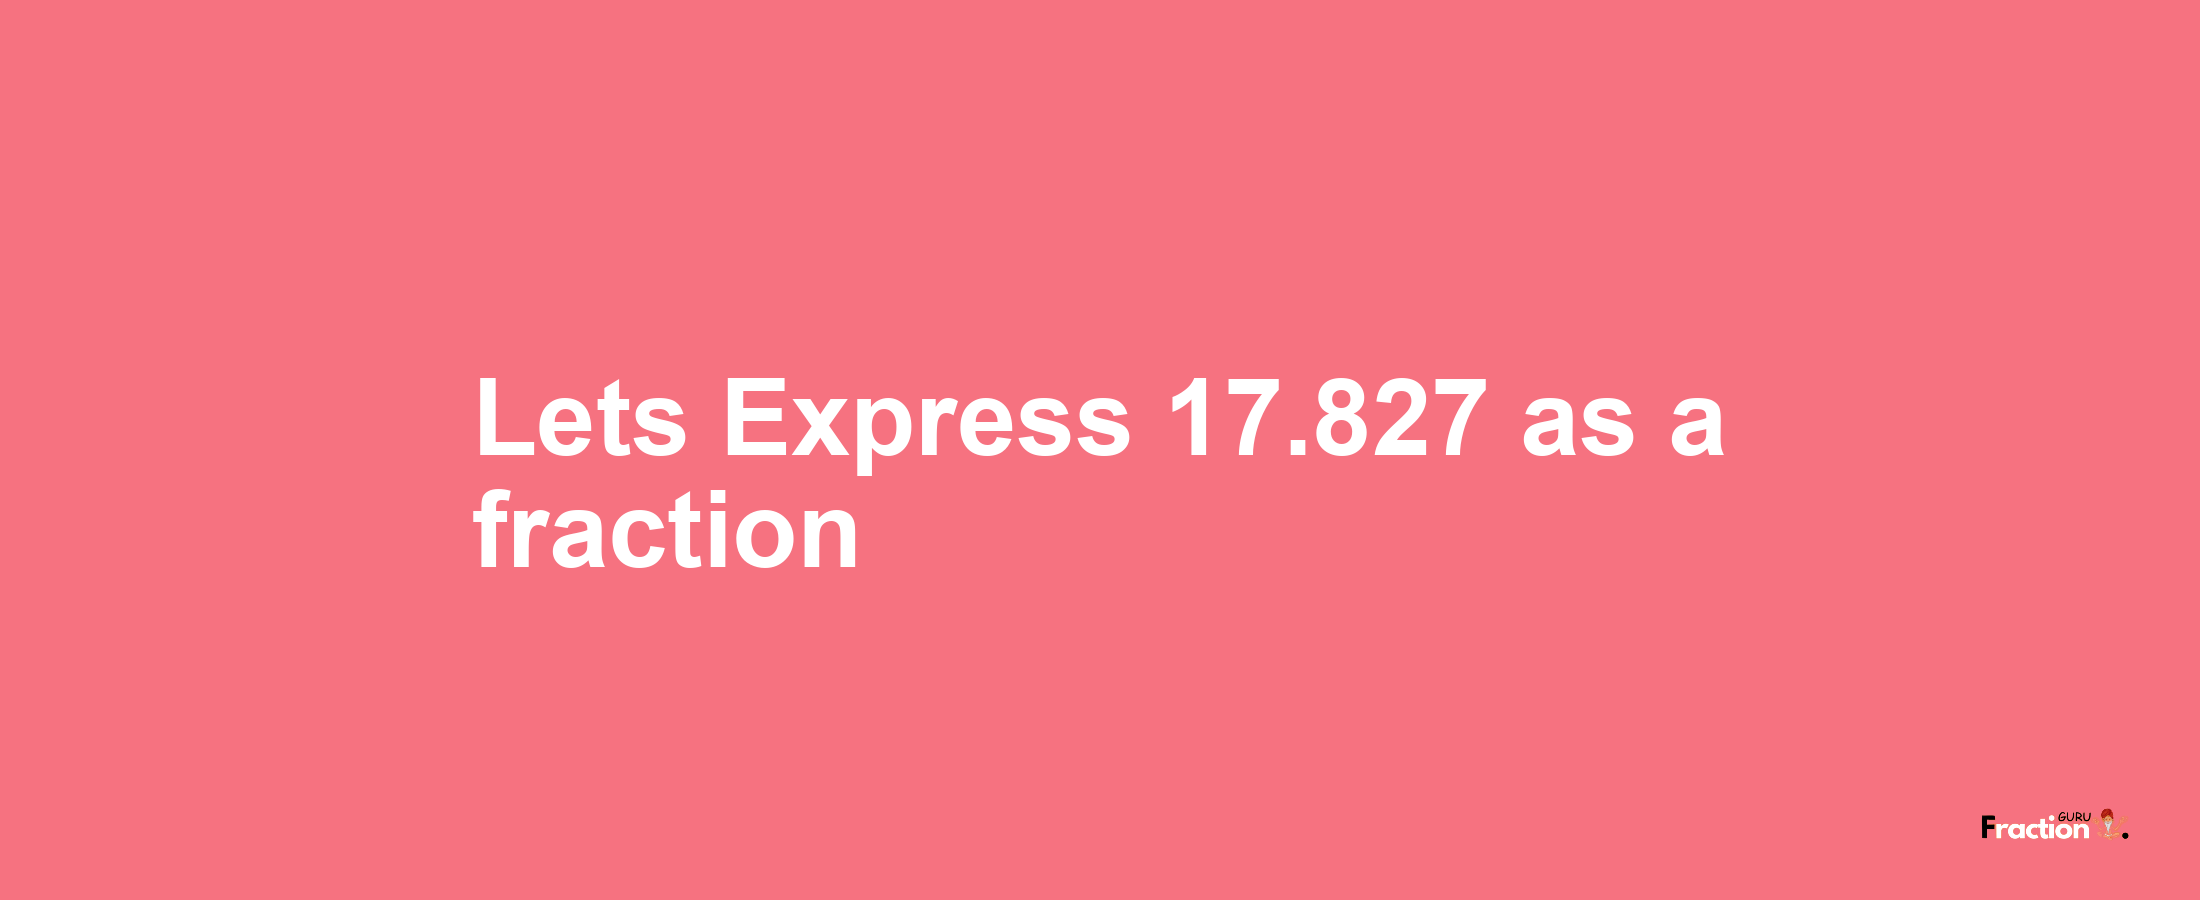 Lets Express 17.827 as afraction